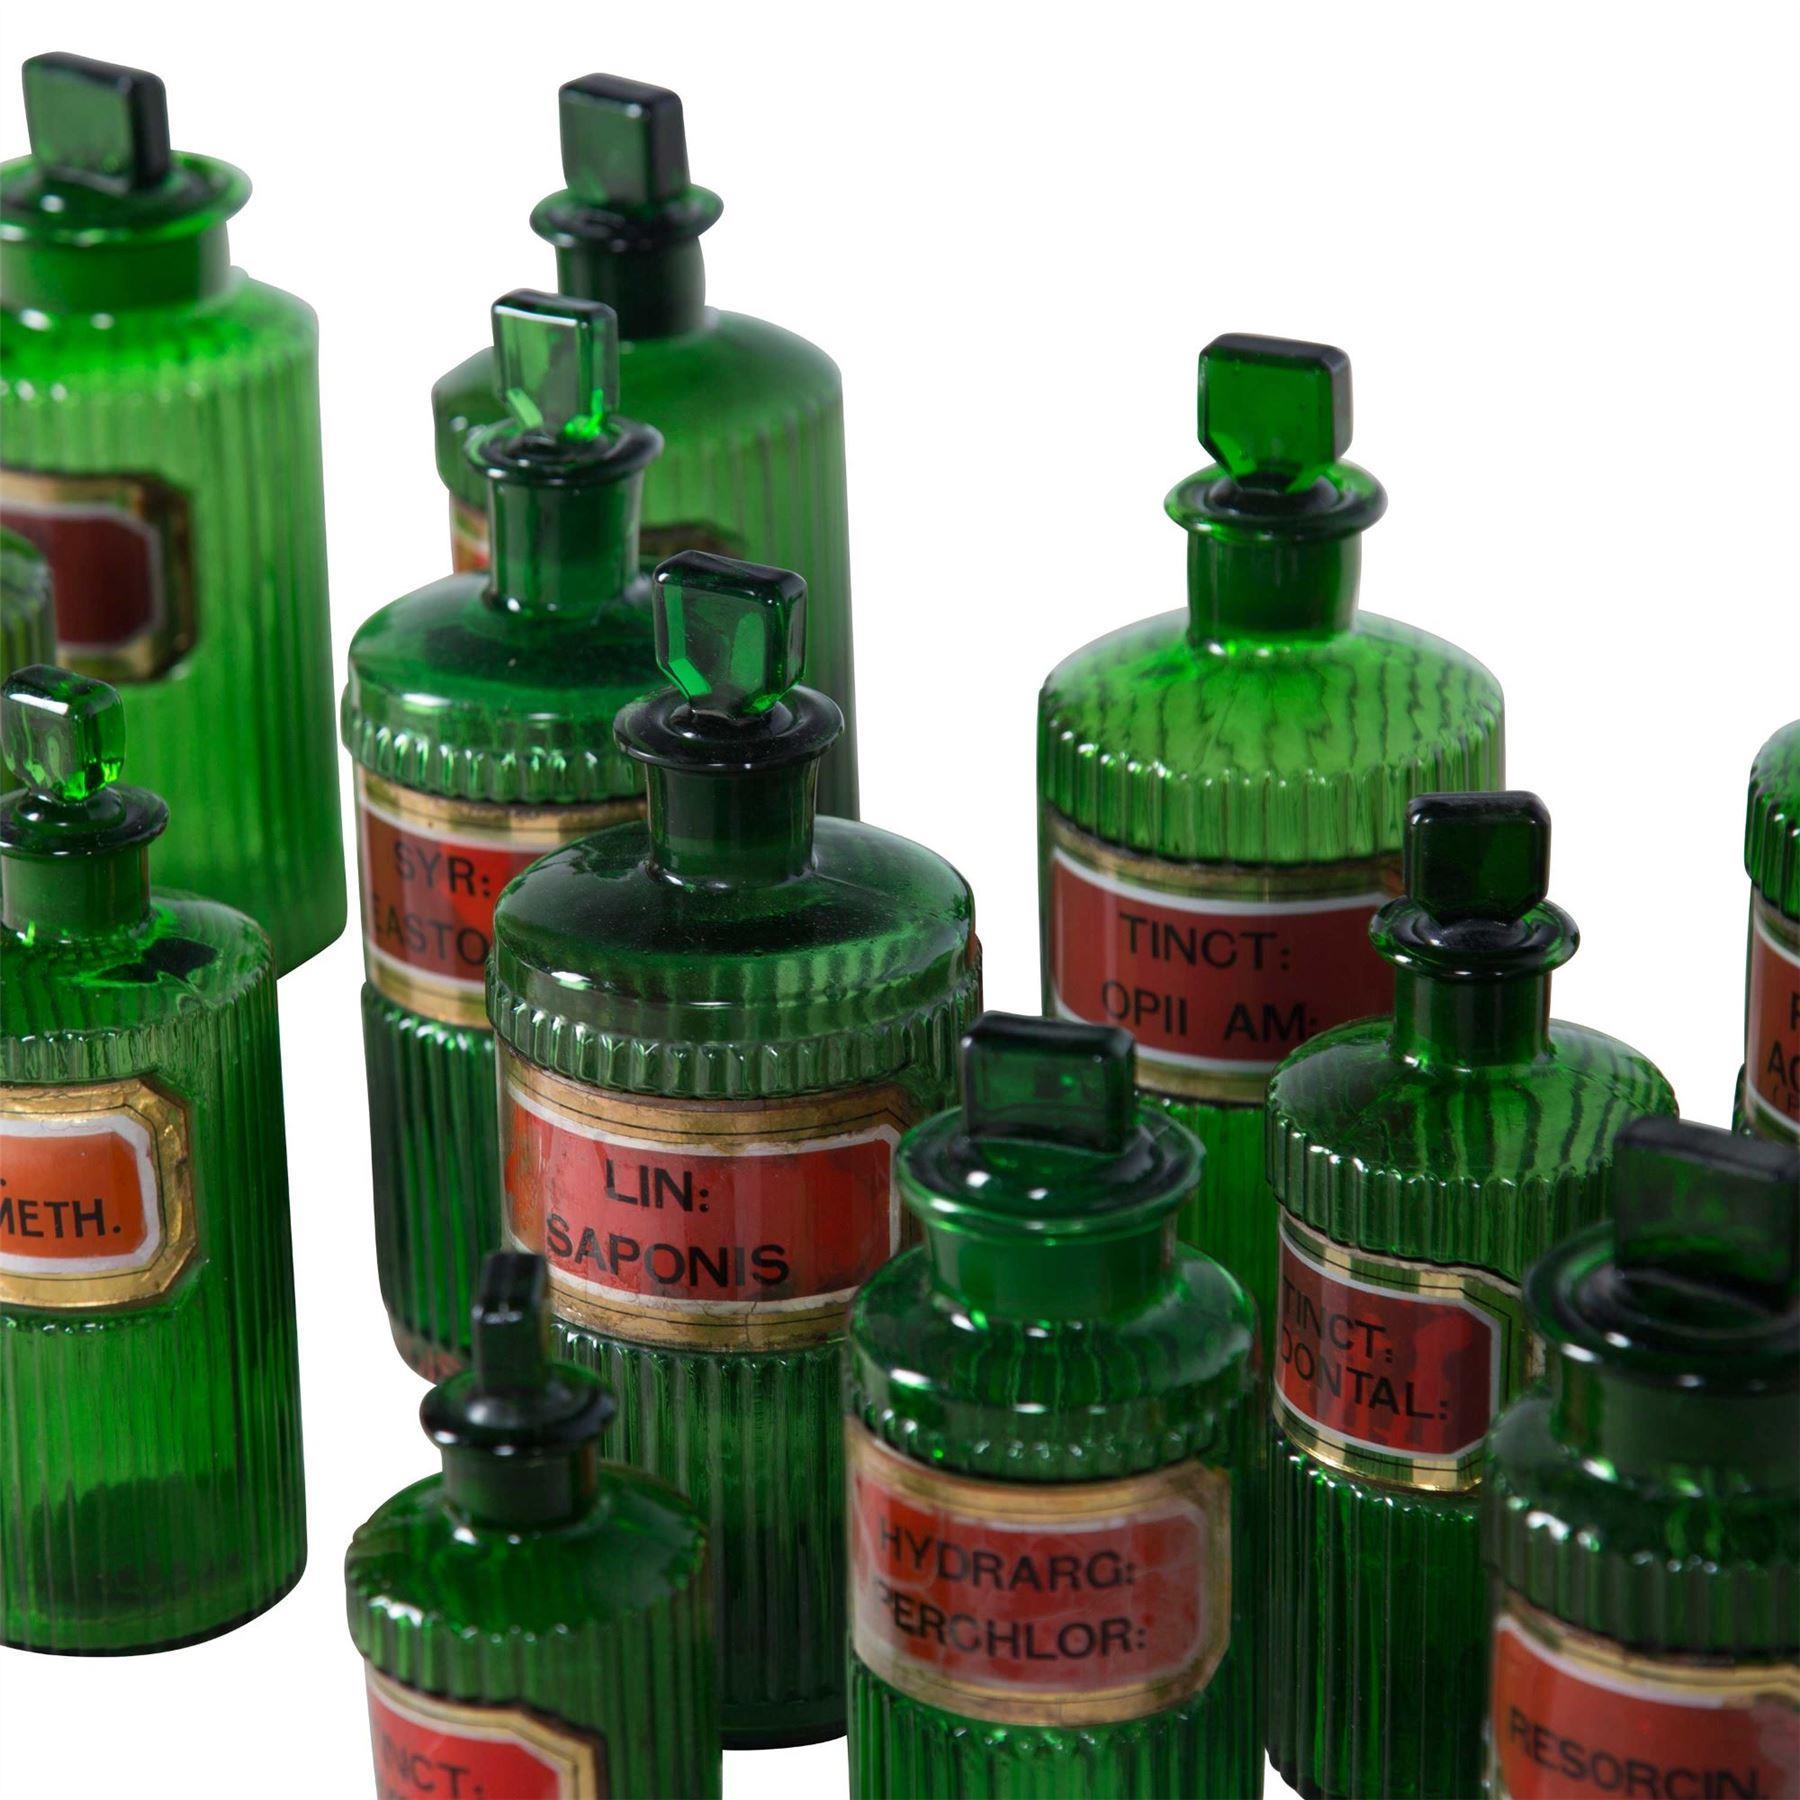 Collection of English emerald green apothecary or chemist bottles, circa 1930s. Great run of seventeen bottles in very good condition with all original labels. Measurements for smaller bottles: Height 15cm, width/depth 5cm.